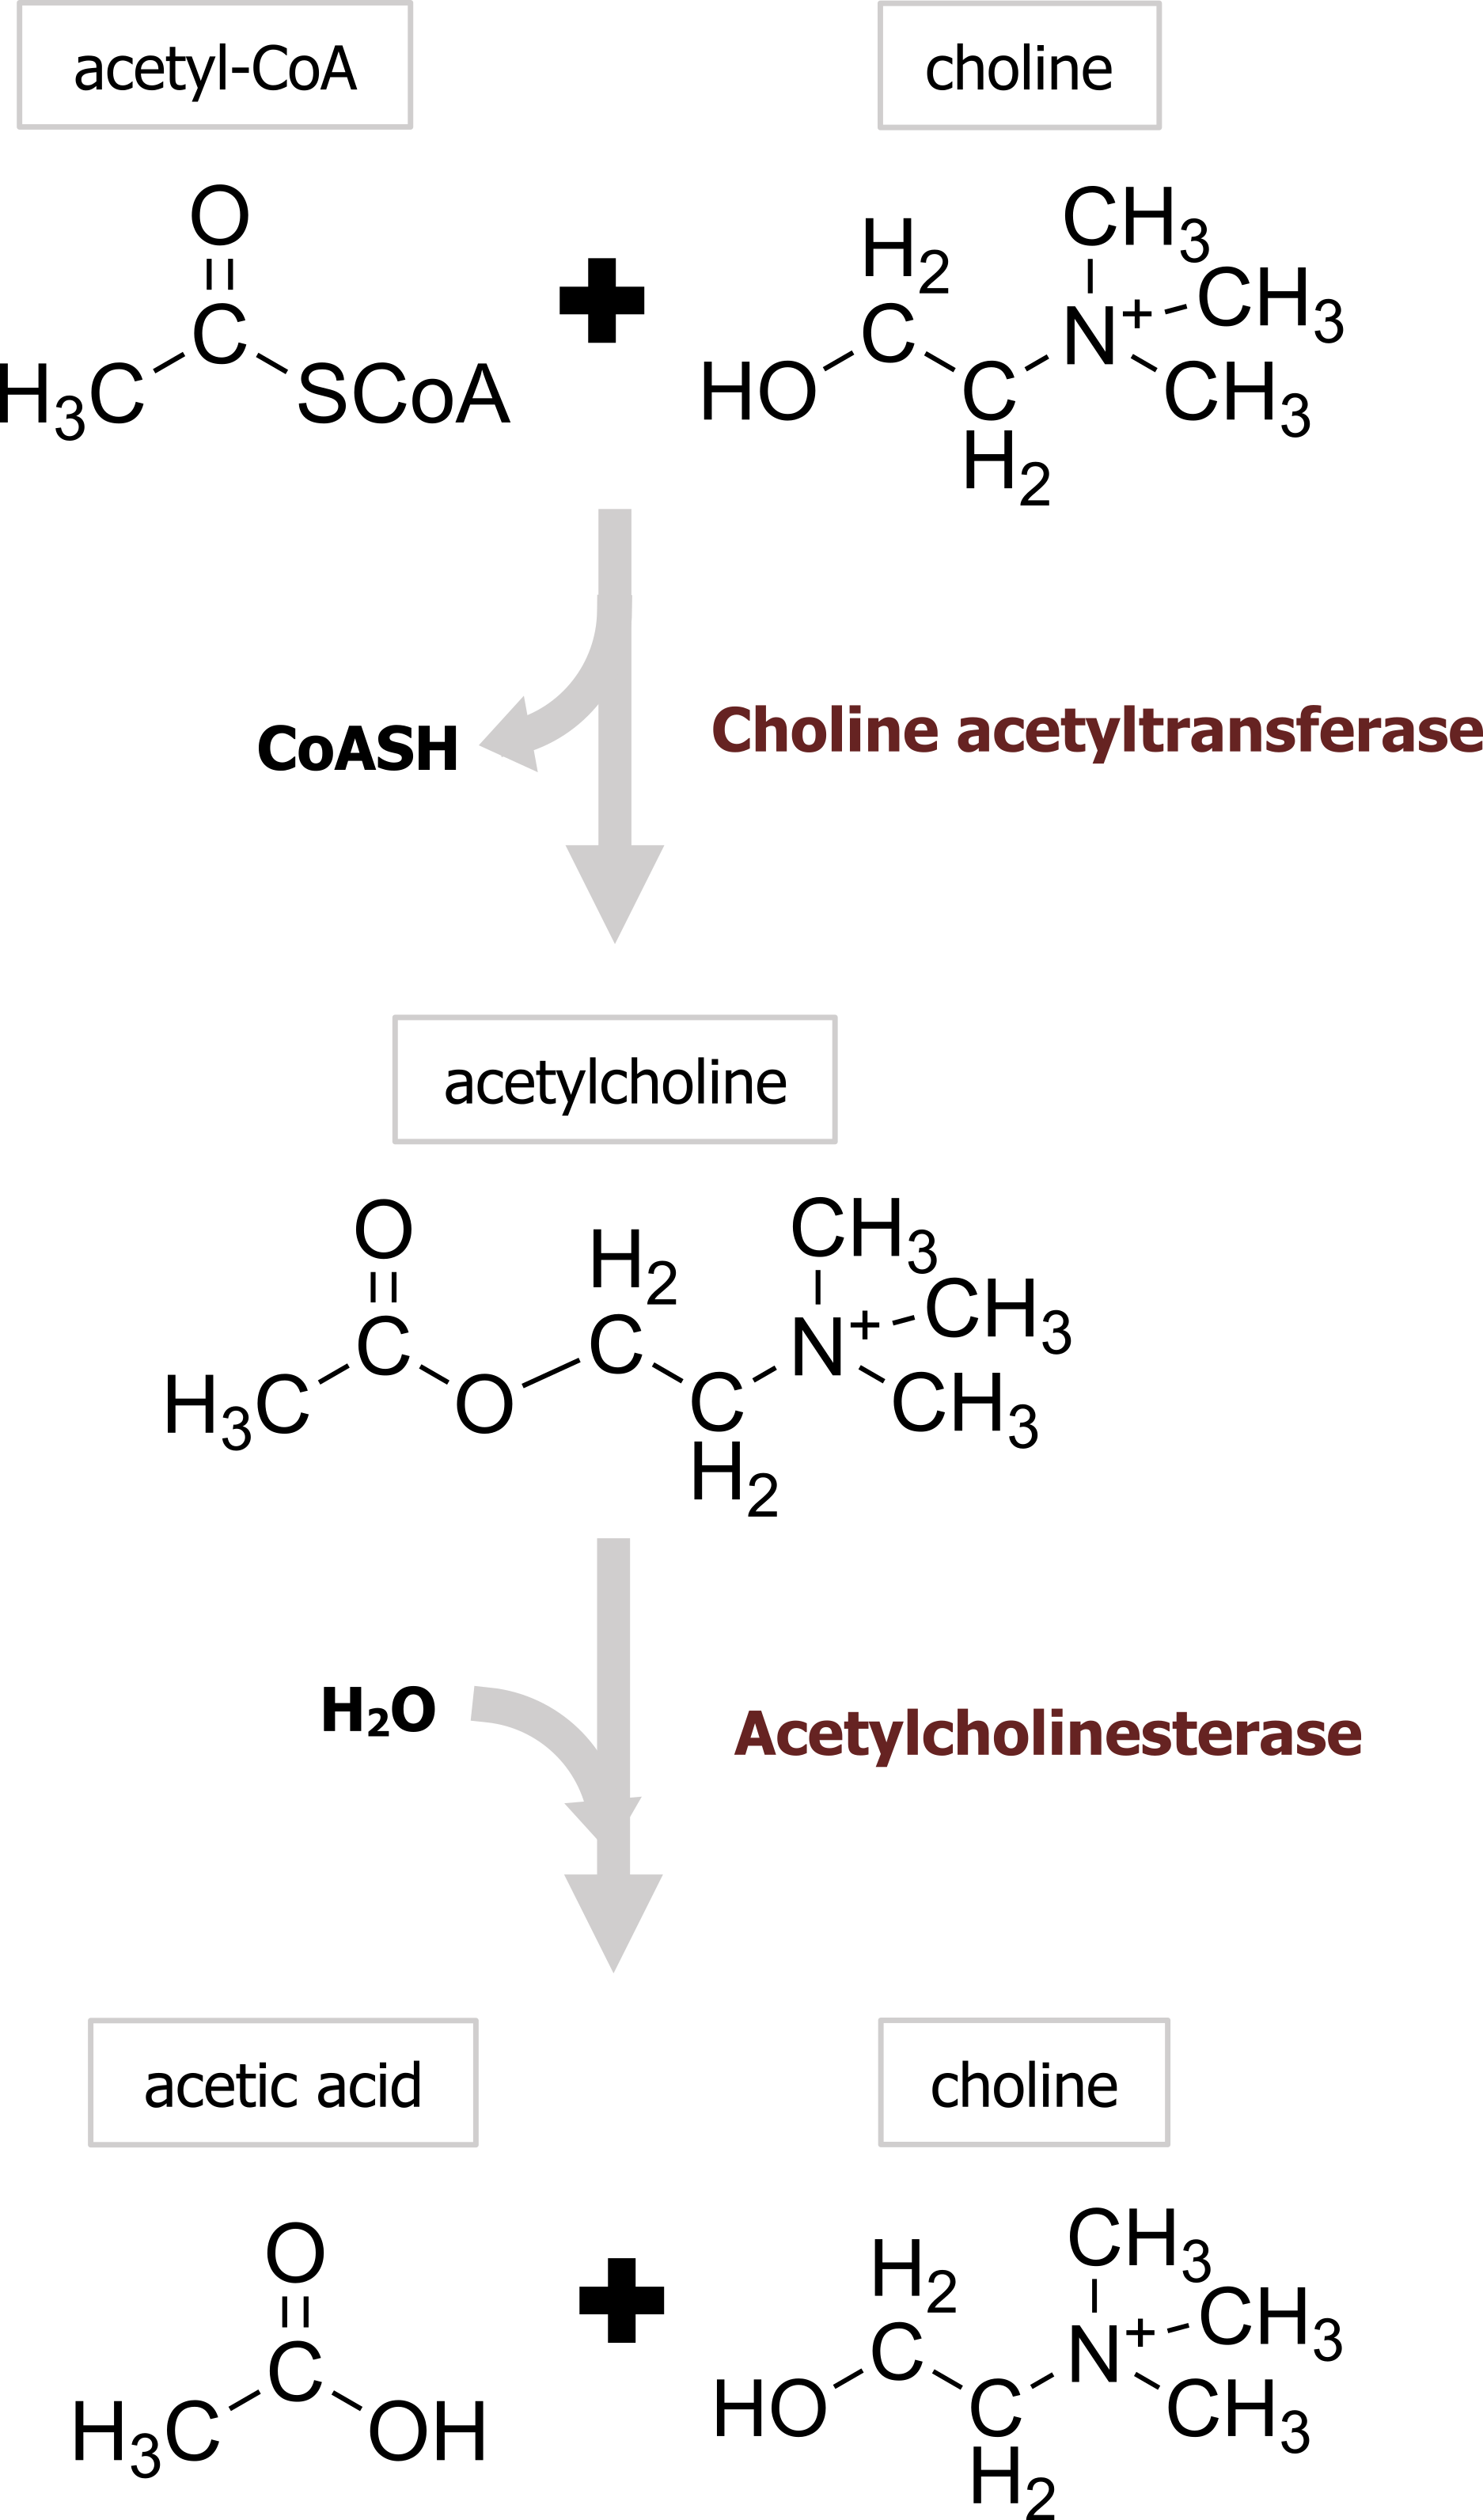 Acetyl-CoA + Choline arrow enzyme Choline acetyltransferase and loss of CoASH to acetylcholine arrow with enzyme acetylcholinesterase and H2O to acetic acid + choline